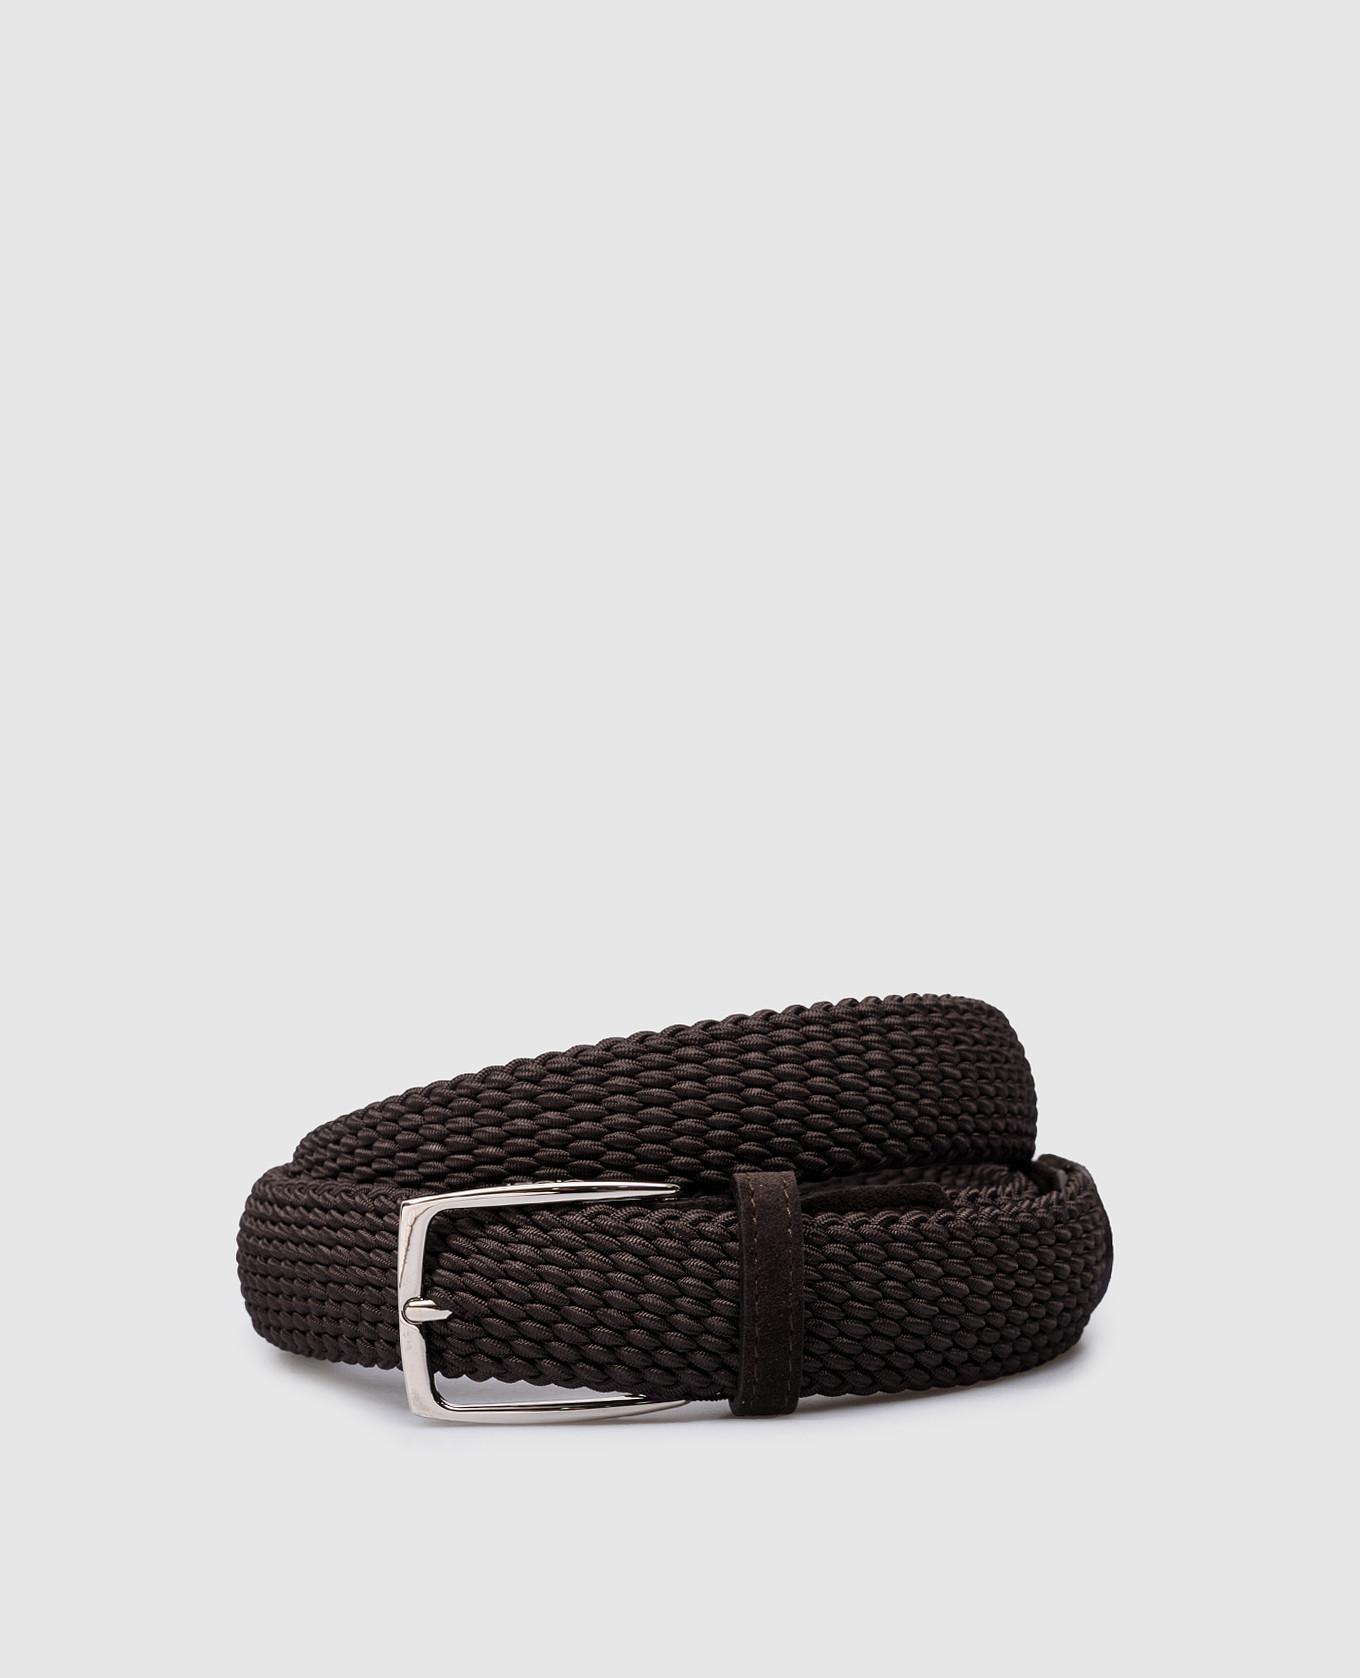 Blue woven belt with logo engraving